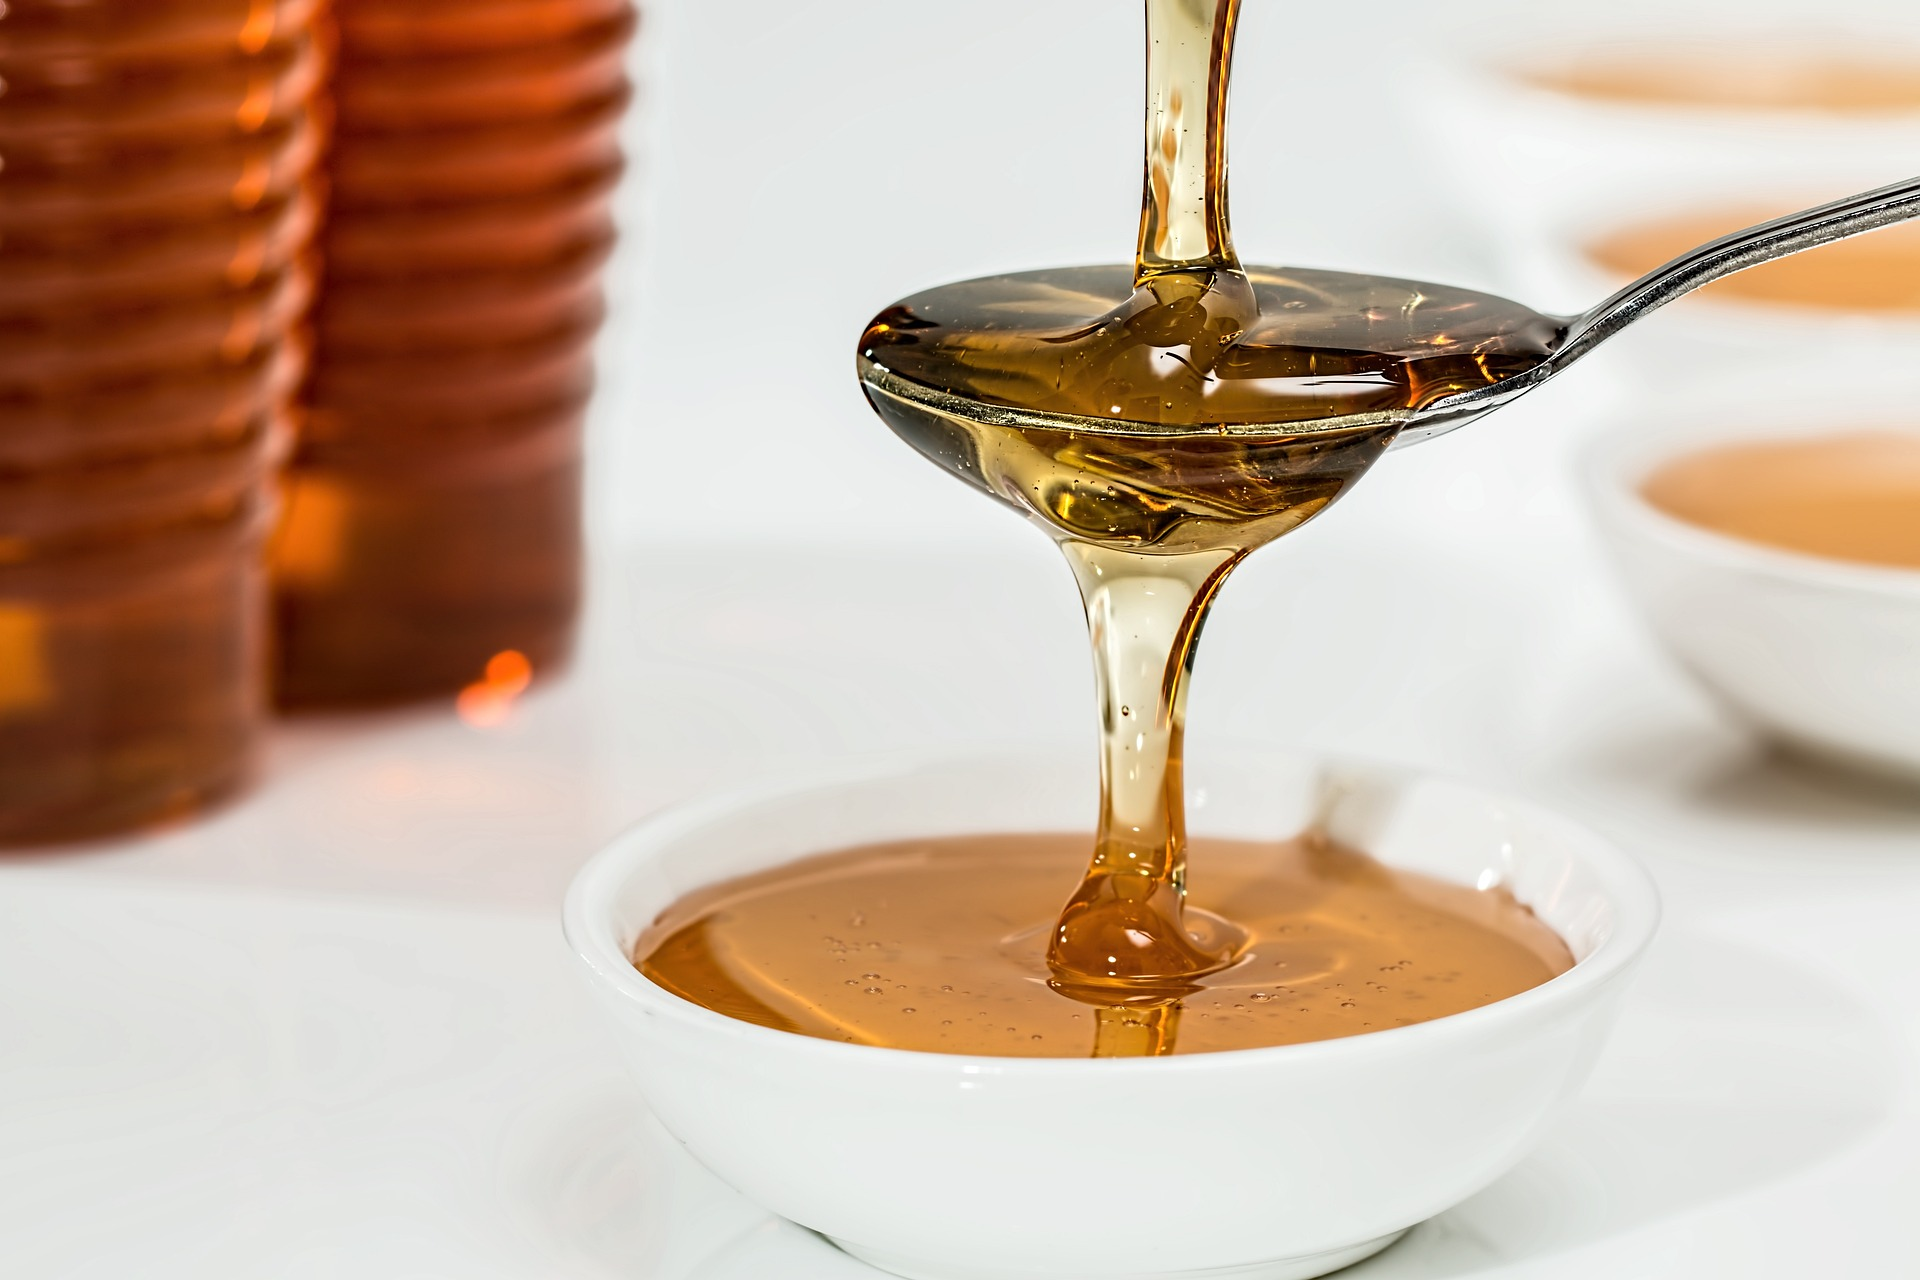 Honey is a Common Ingredient in Cosmetics